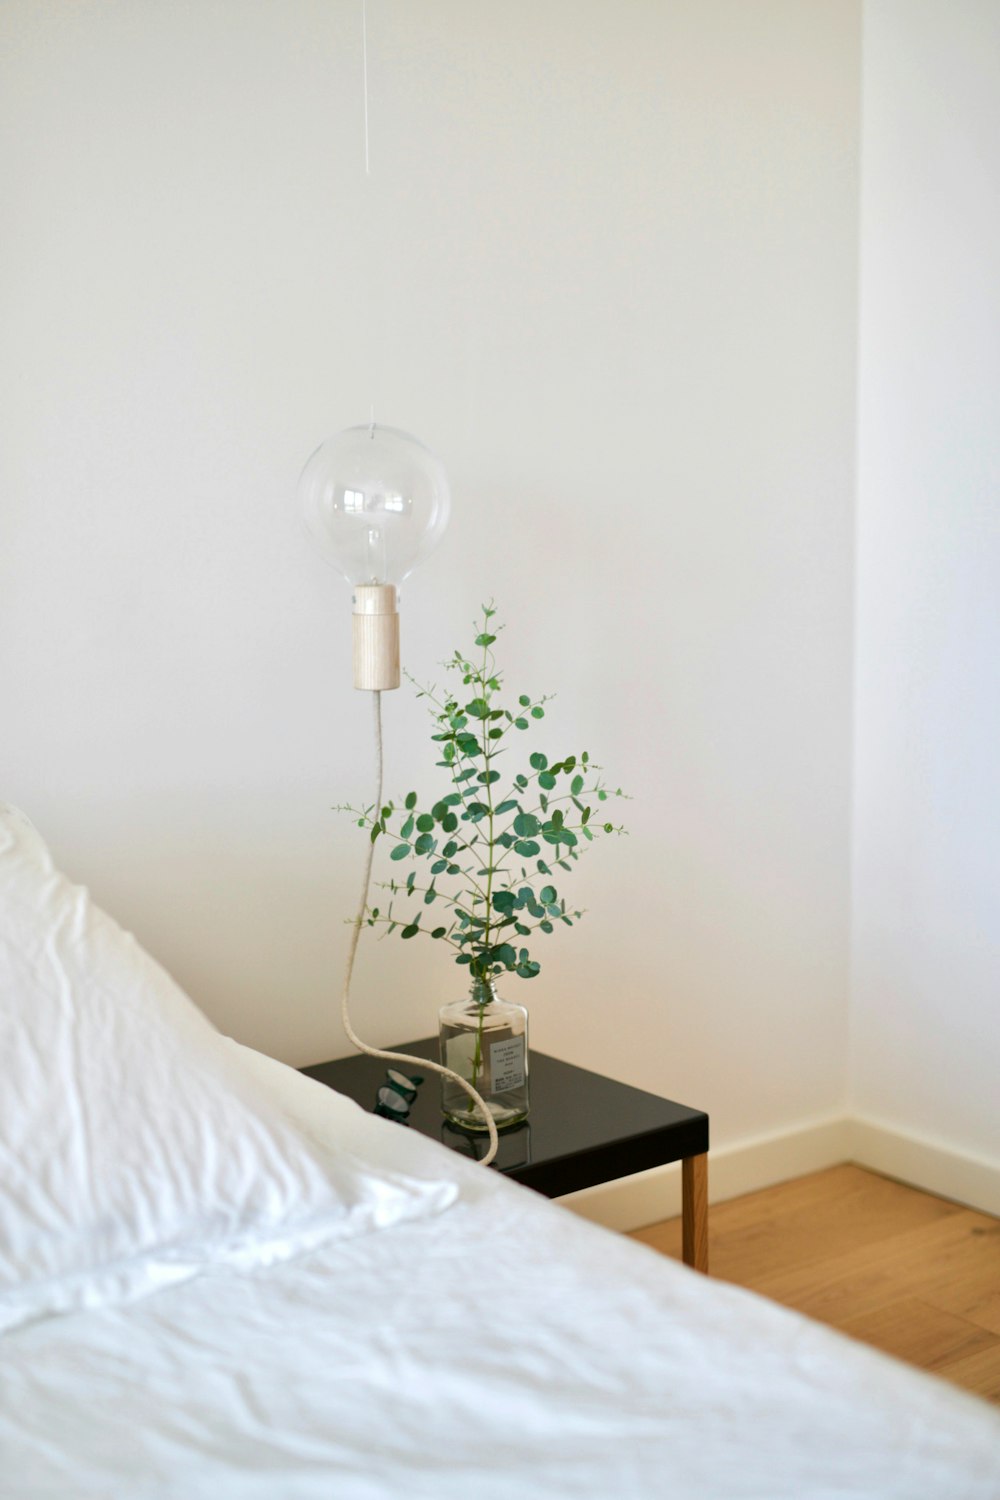 green plant beside table lamp in room